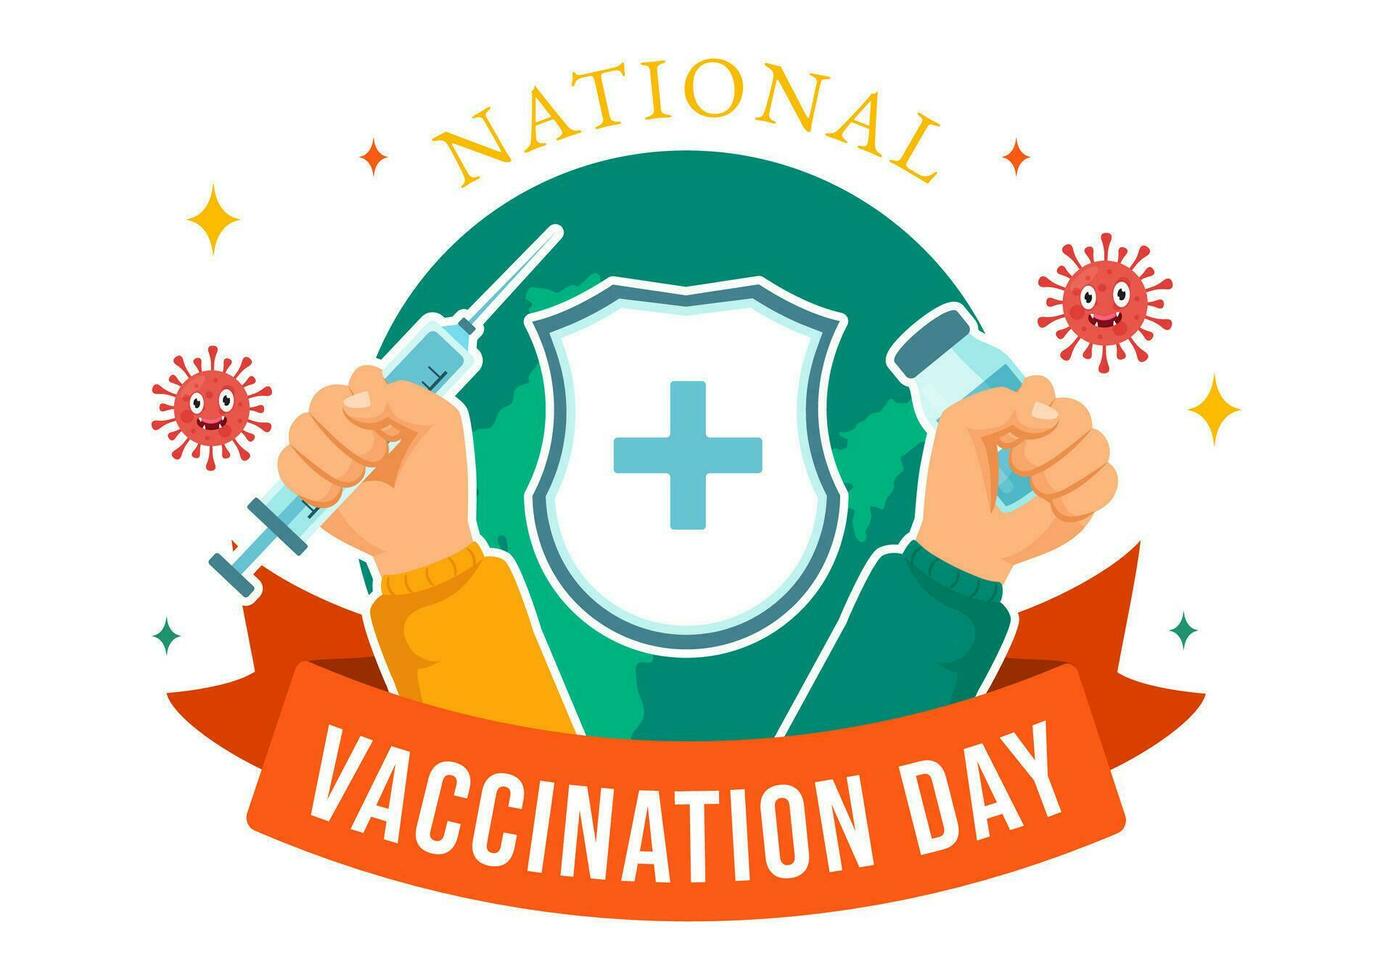 National Vaccination Day Vector Illustration on March 16 with Vaccine Syringe for Strong Immunity from Bacteria and Health Care in Flat Background